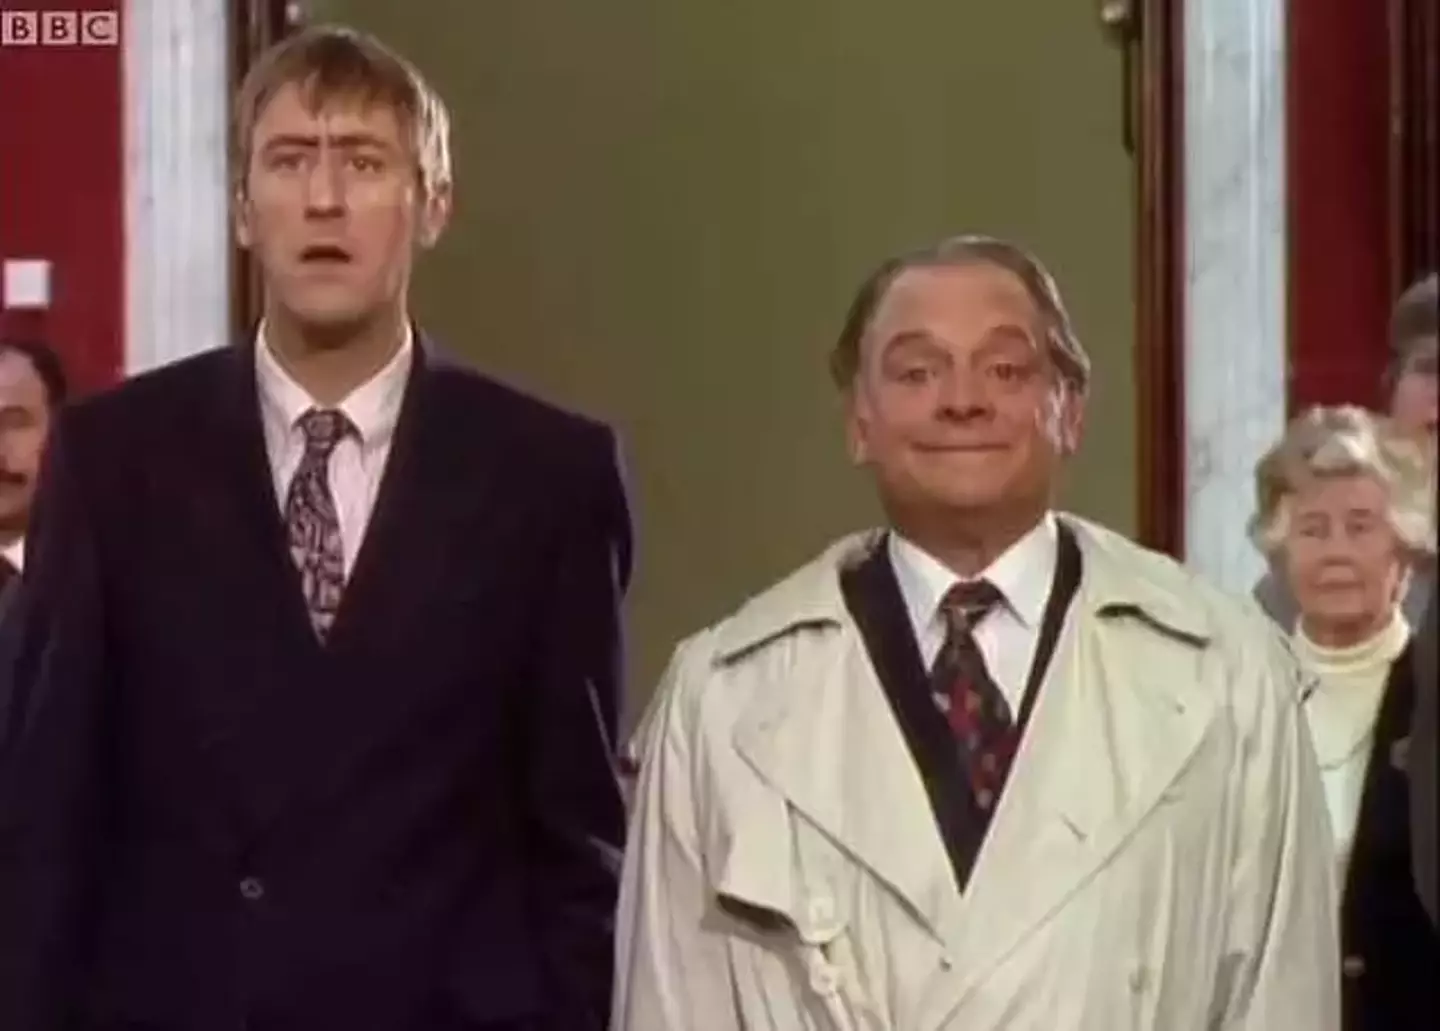 Best known for his role in Only Fools And Horses, Lyndhurst played Rodney Trotter, the less streetwise younger brother of market trader Sir David Jason’s Derek Trotter (Del Boy).